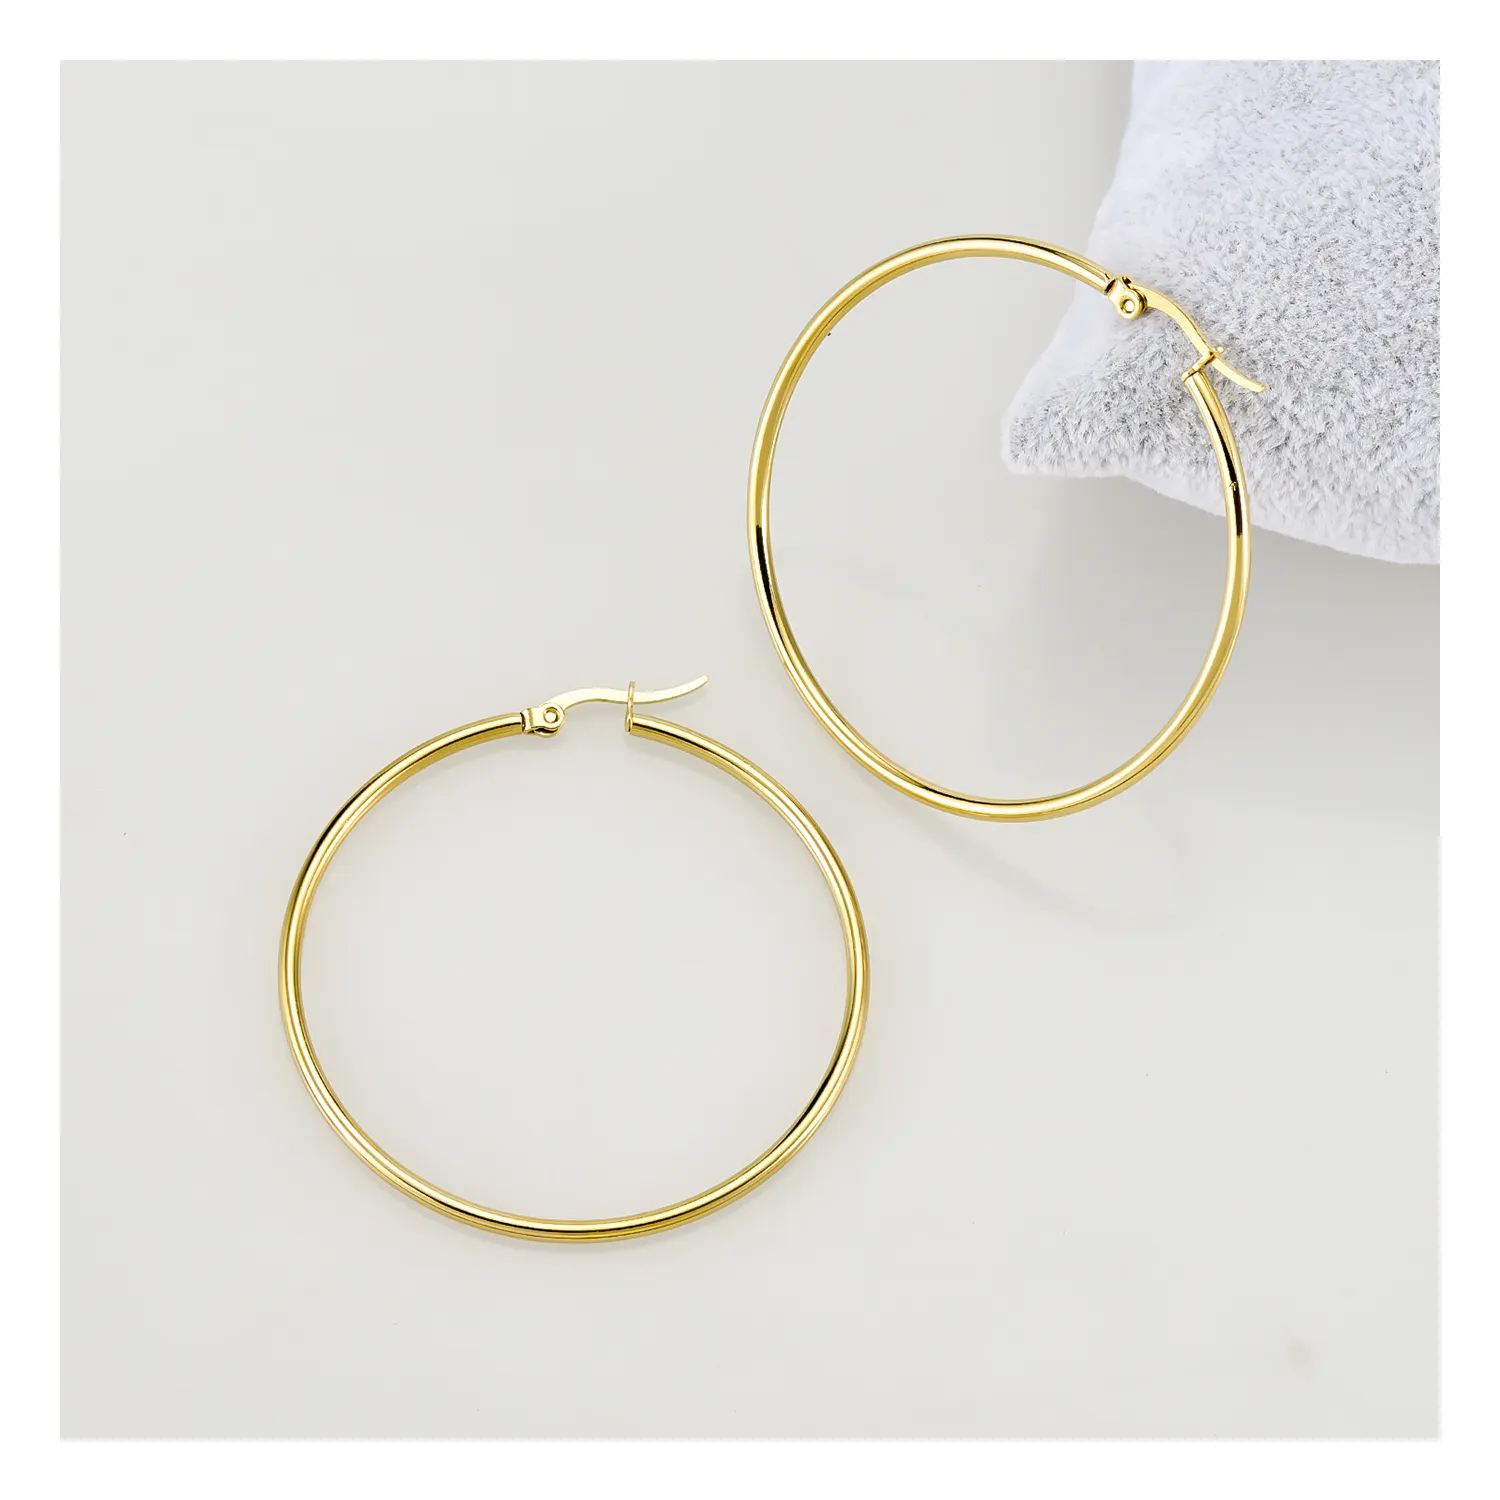 18K real gold plated stainless steel wire round basic hoop earrings classic hooped for women girls